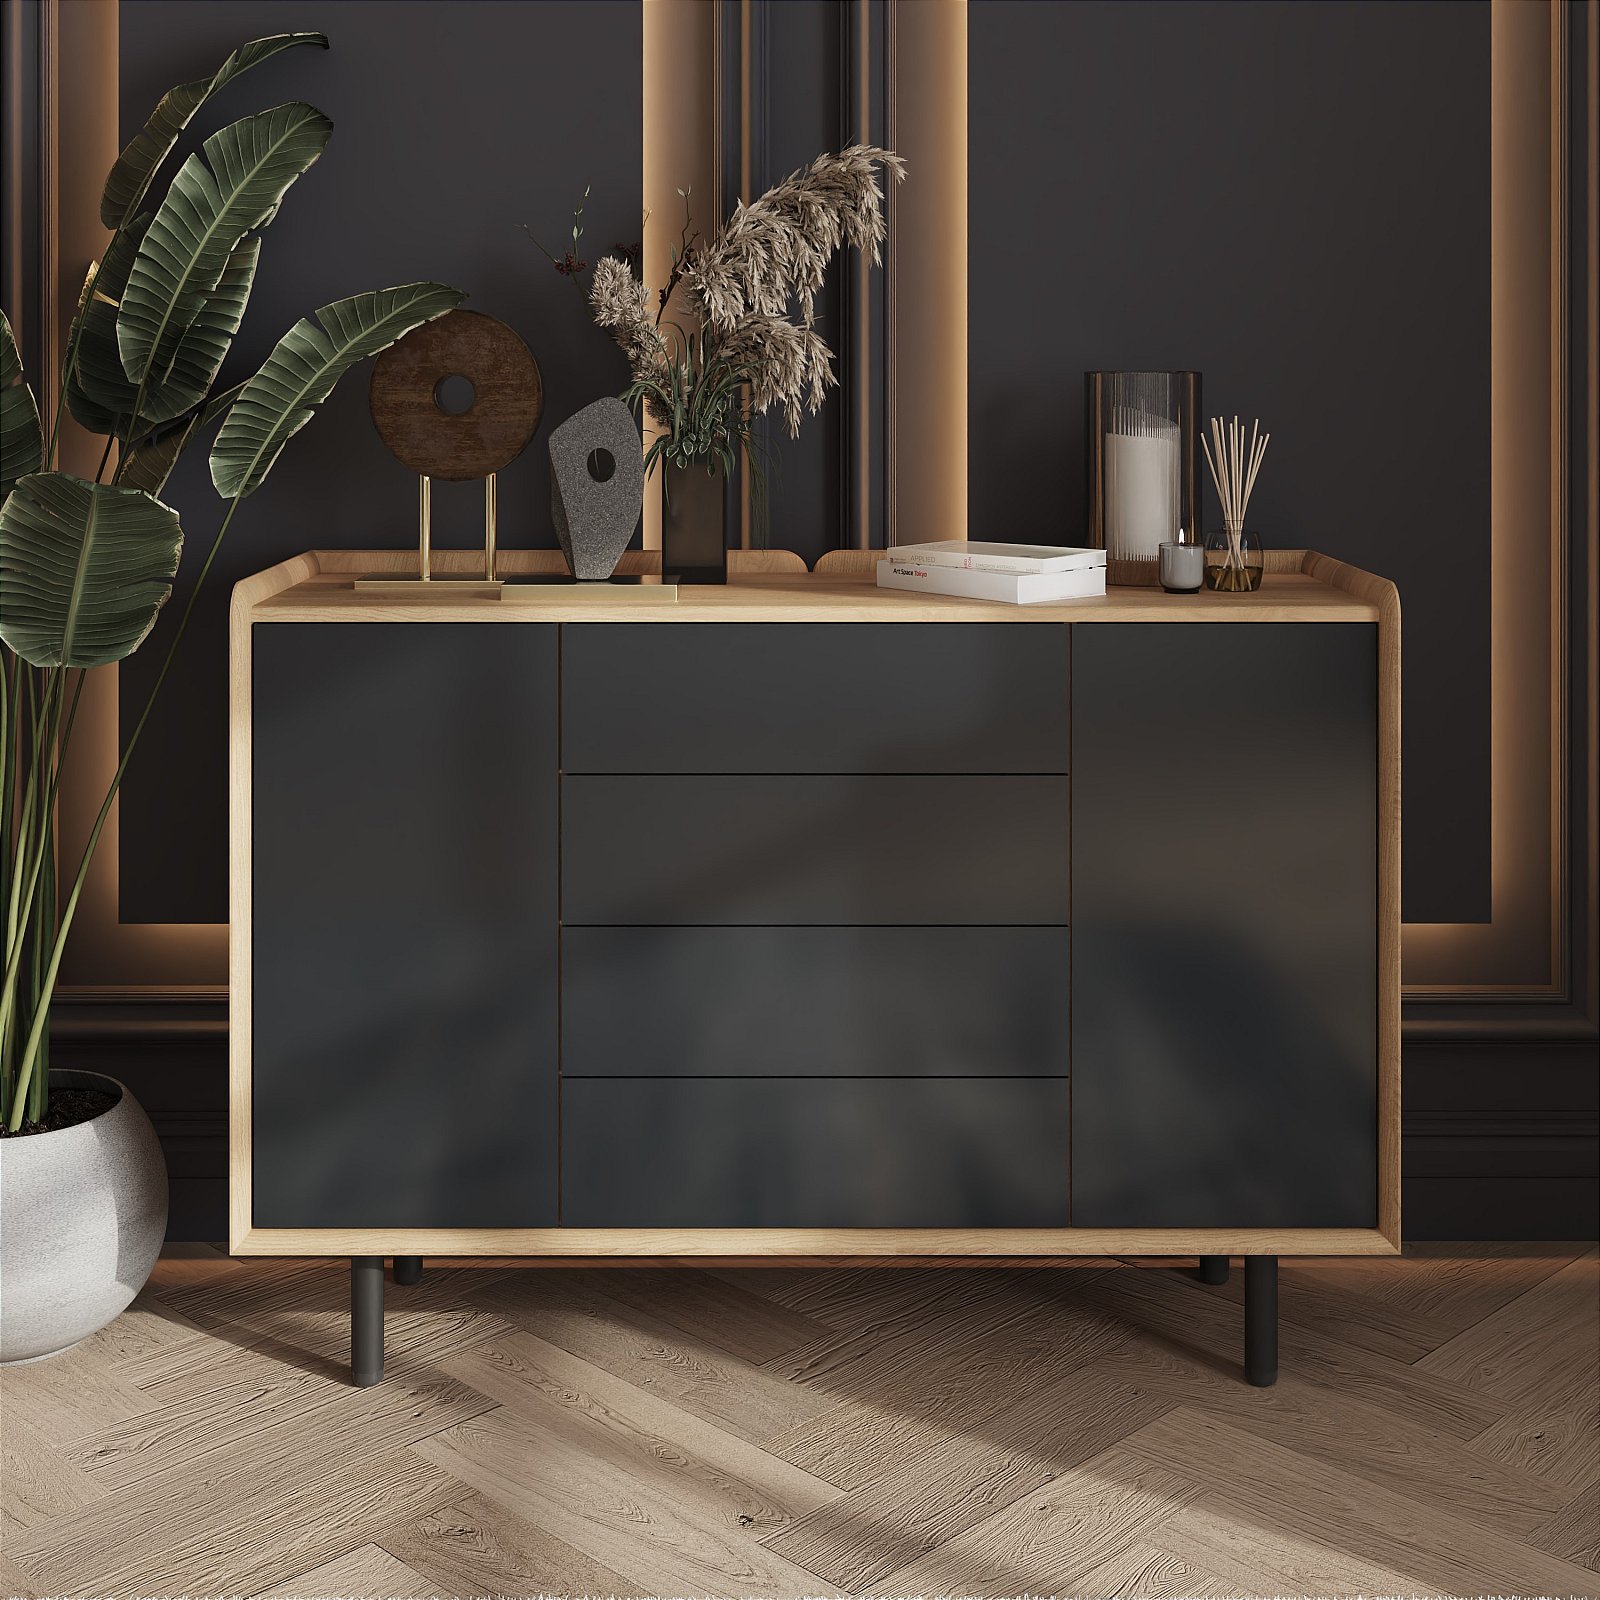 Bell And Stocchero Balto Large Sideboard